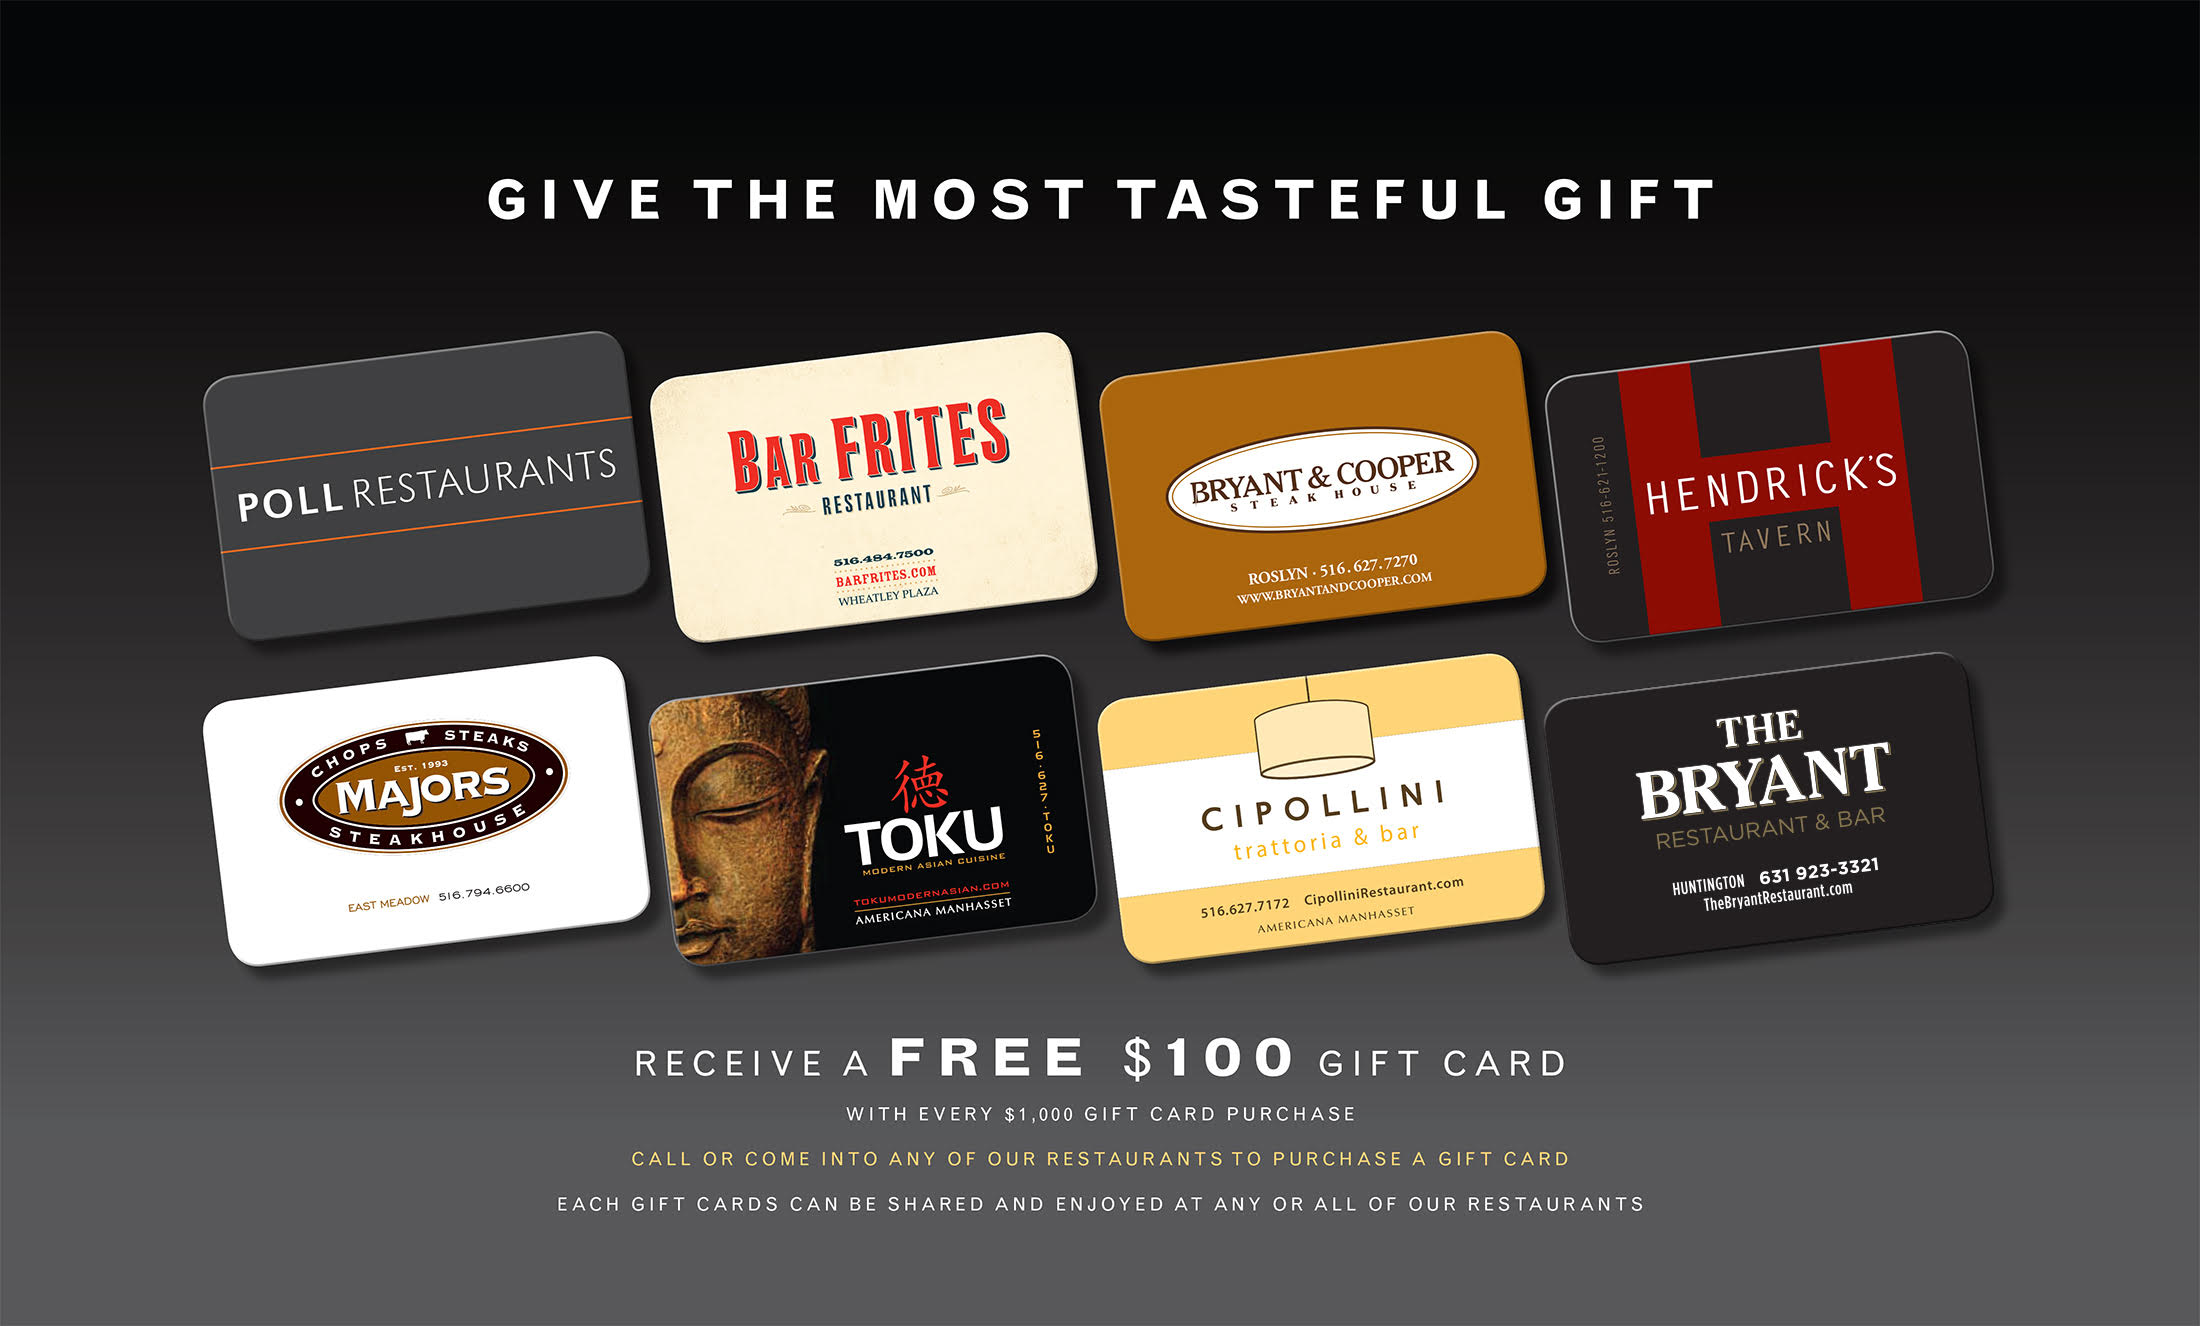 Receive a FREE $100 Gift Card with every $1,000 Gift card purchase, call or come into any of our restaurants to purchase a  gift card